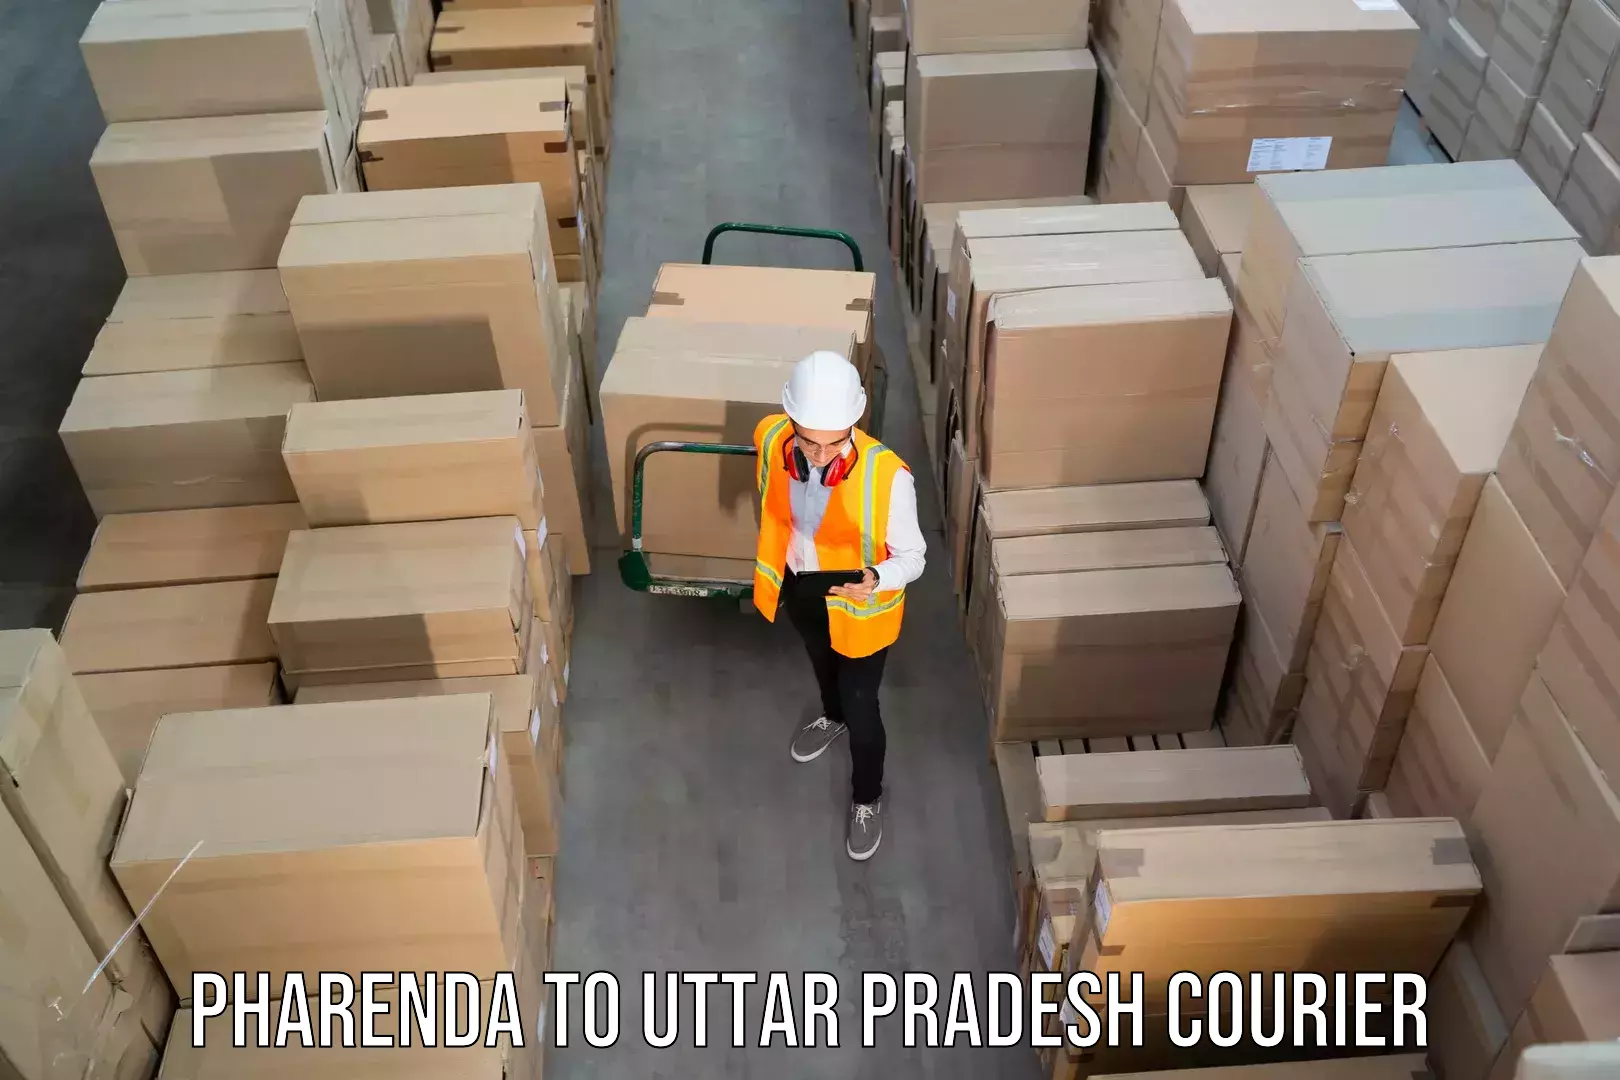 Express mail service Pharenda to Lucknow